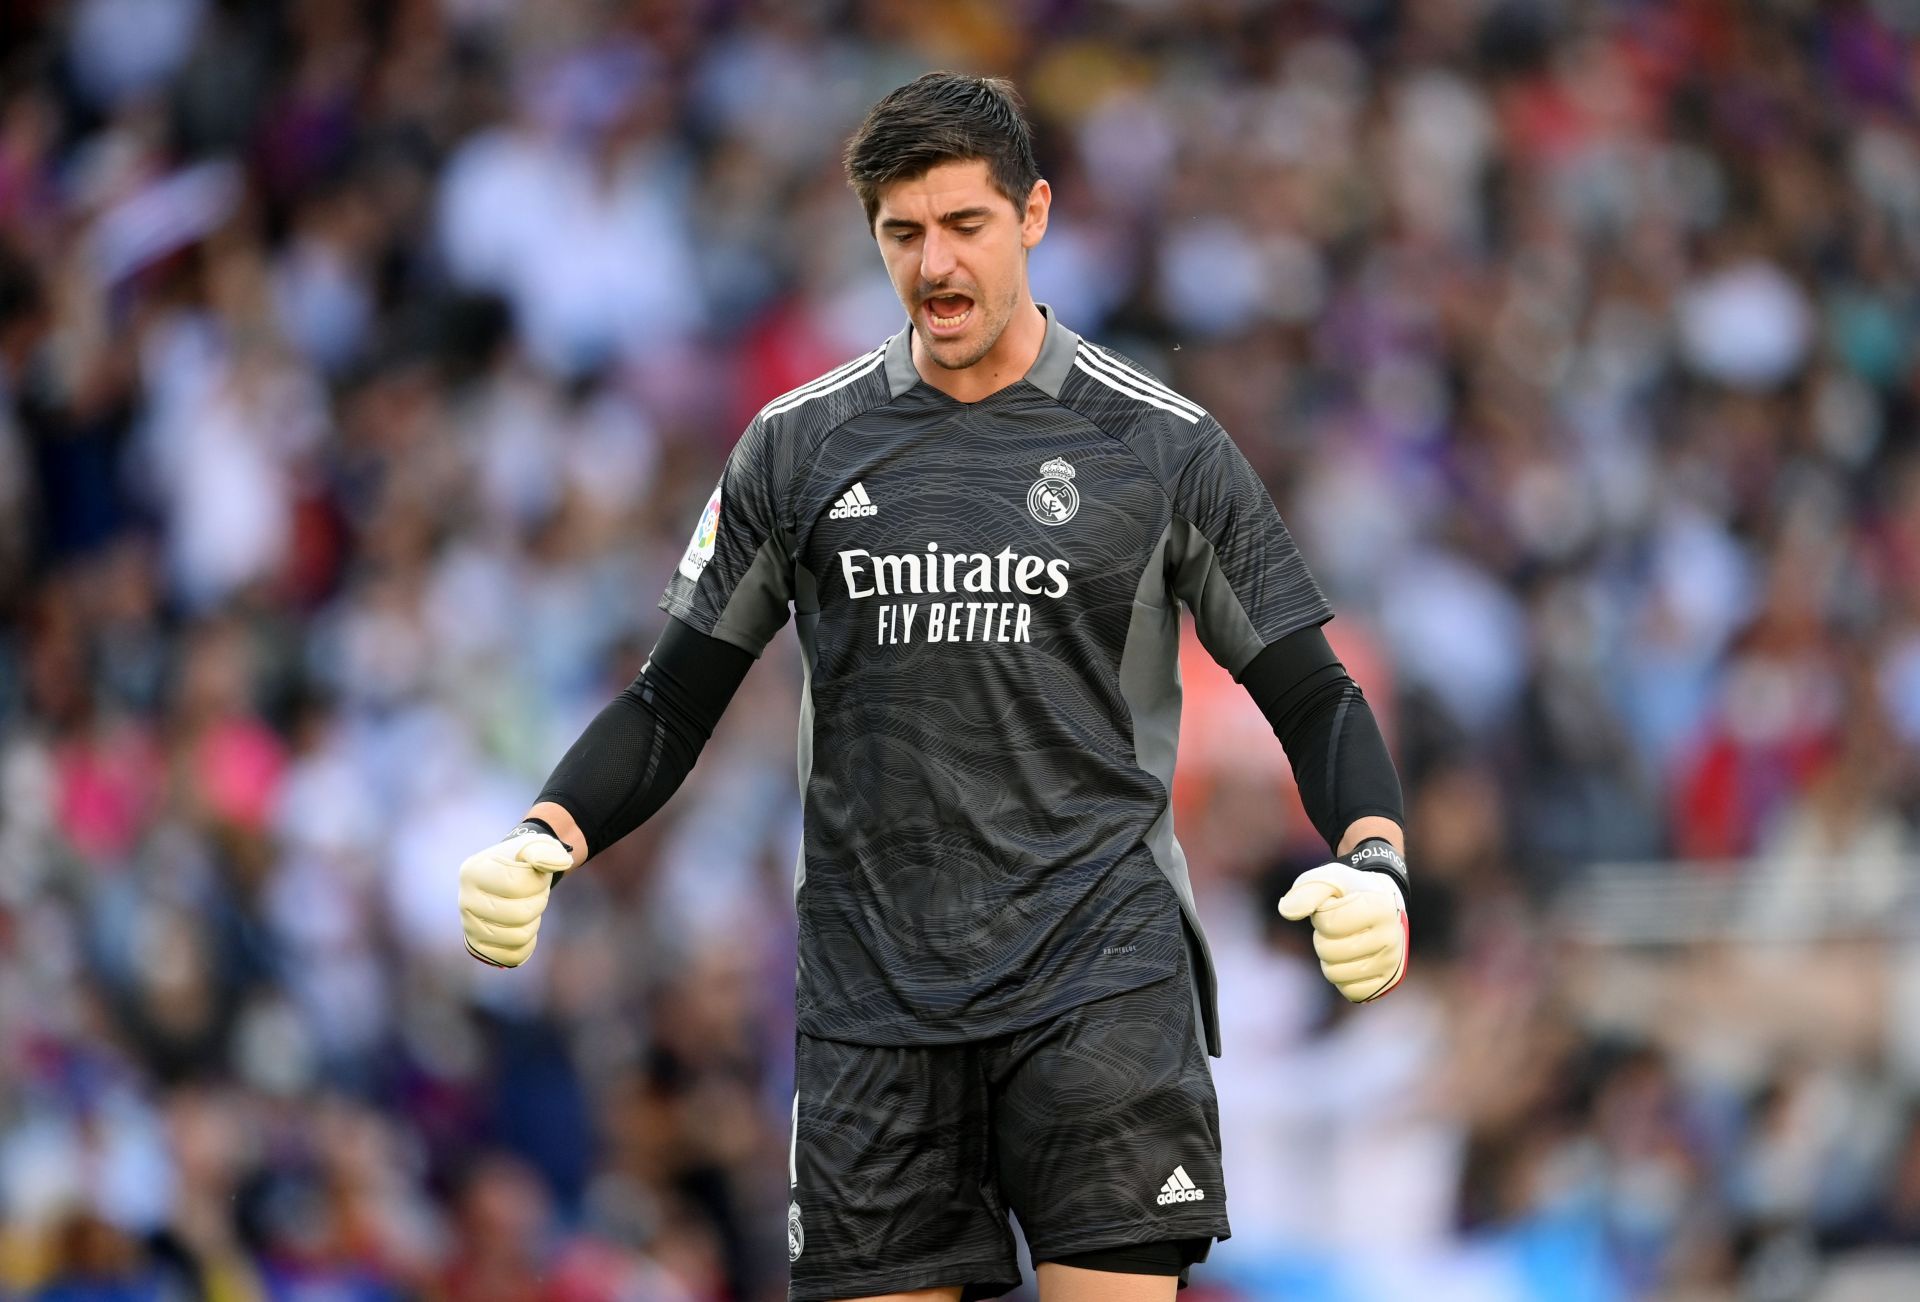 Thibaut Courtois will have to once again stand tall